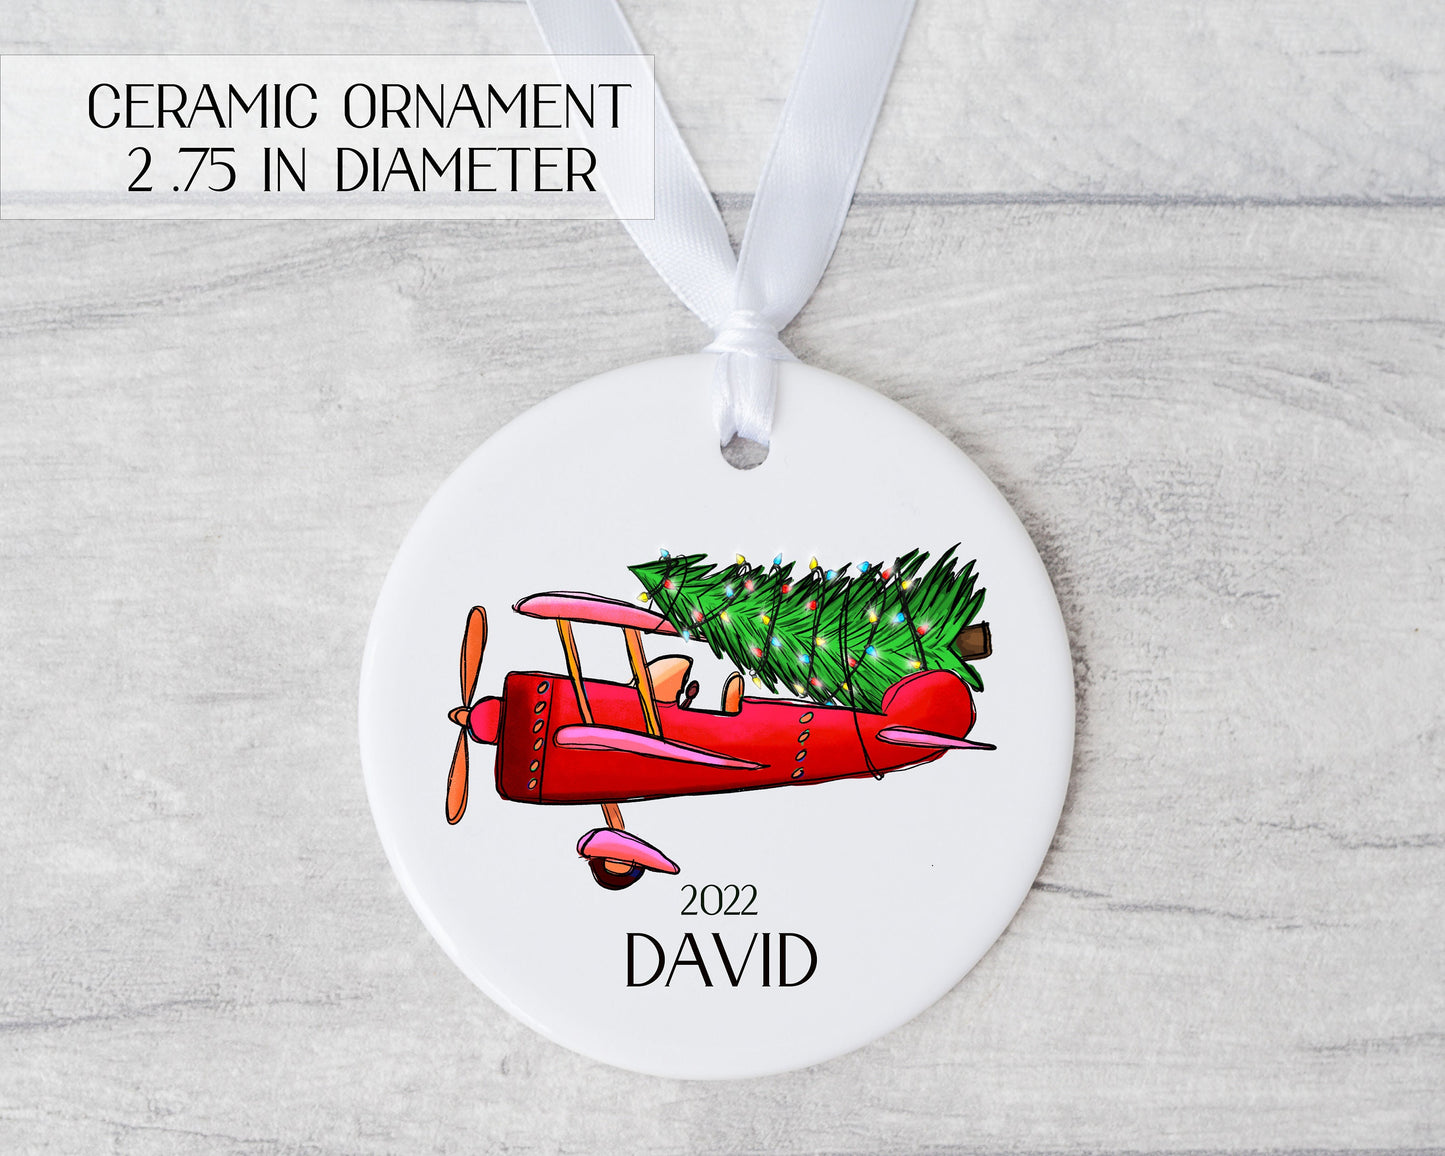 Airplane ornament - Personalized aviation ornament - Ceramic airplane ornament -Personalized airplane Christmas ornament